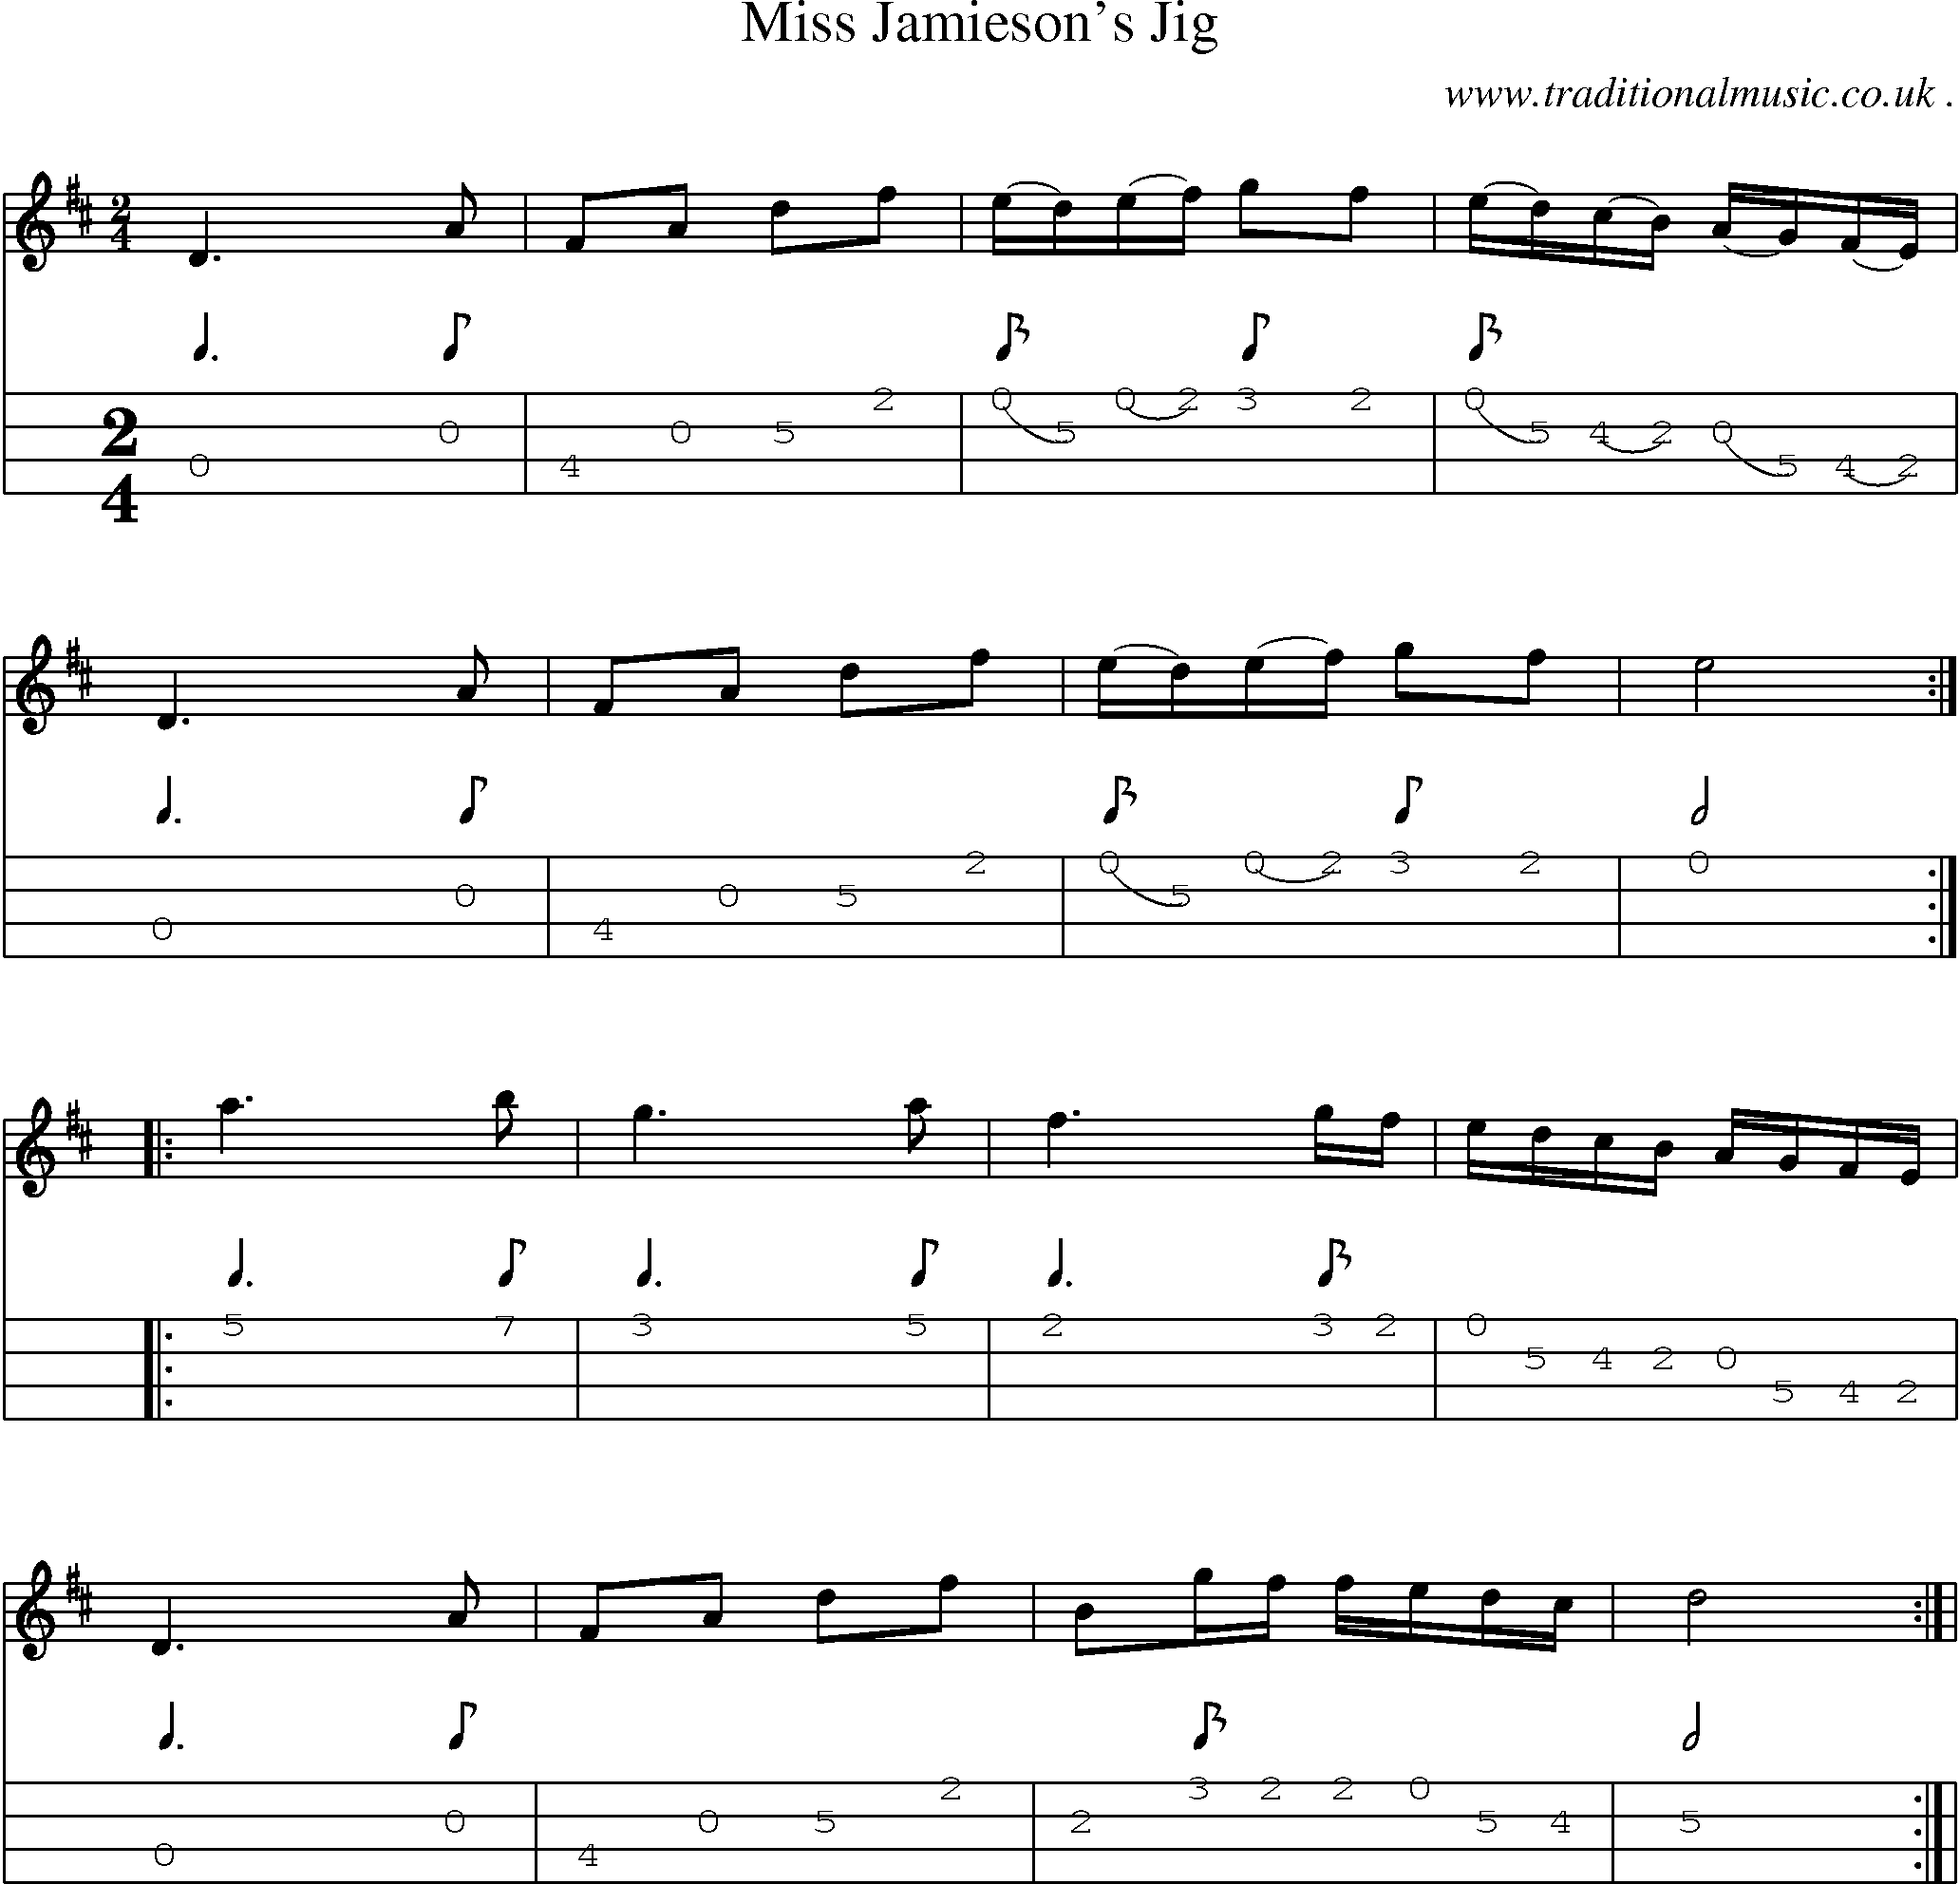 Sheet-Music and Mandolin Tabs for Miss Jamiesons Jig